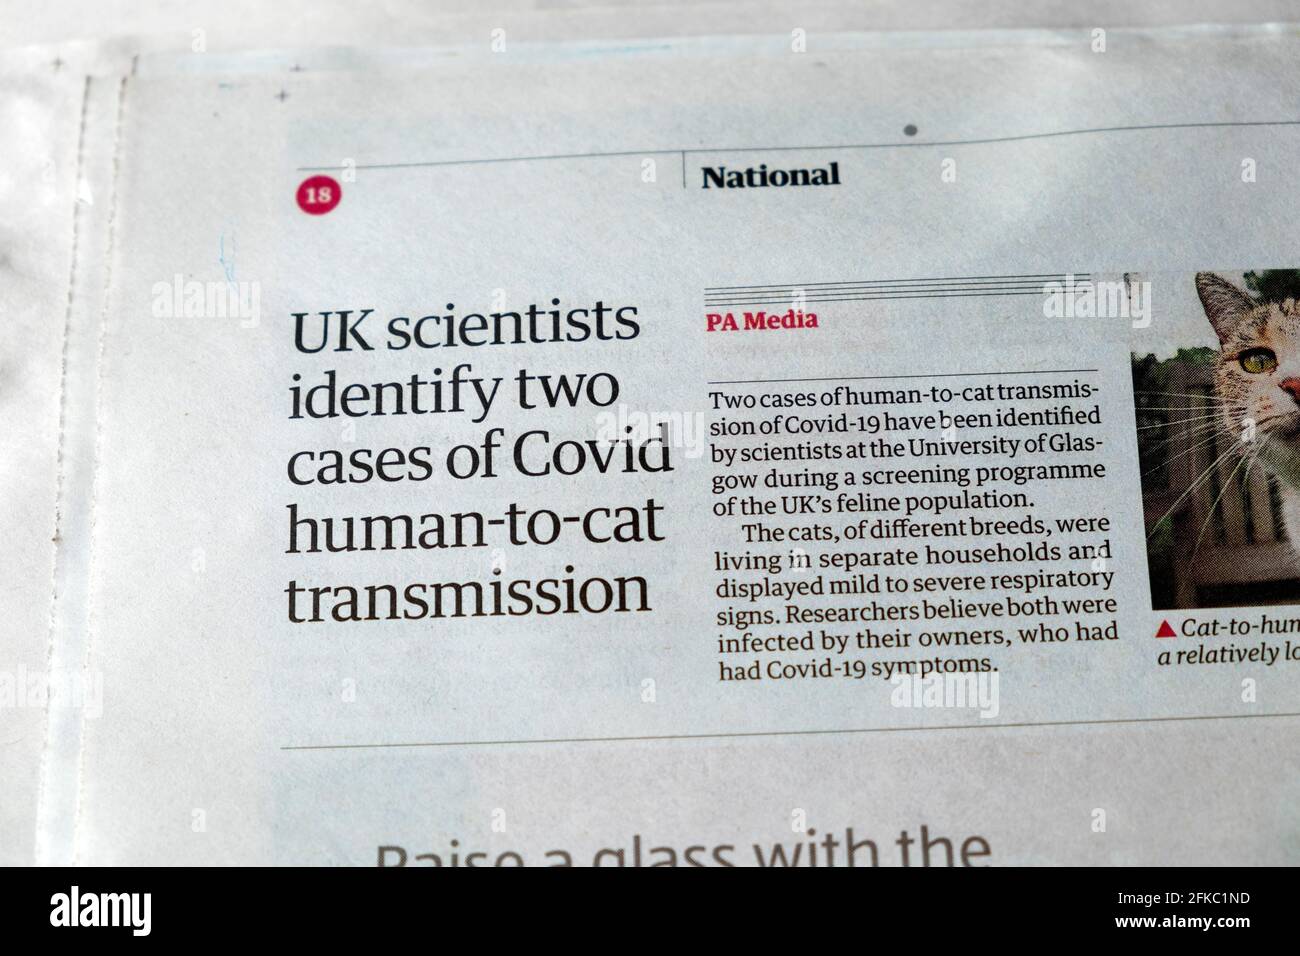 'UK scientists identify two cases of Covid human-to-cat transmission' Guardian newspaper coronavirus pandemic article page London UK 24 April 2021 Stock Photo